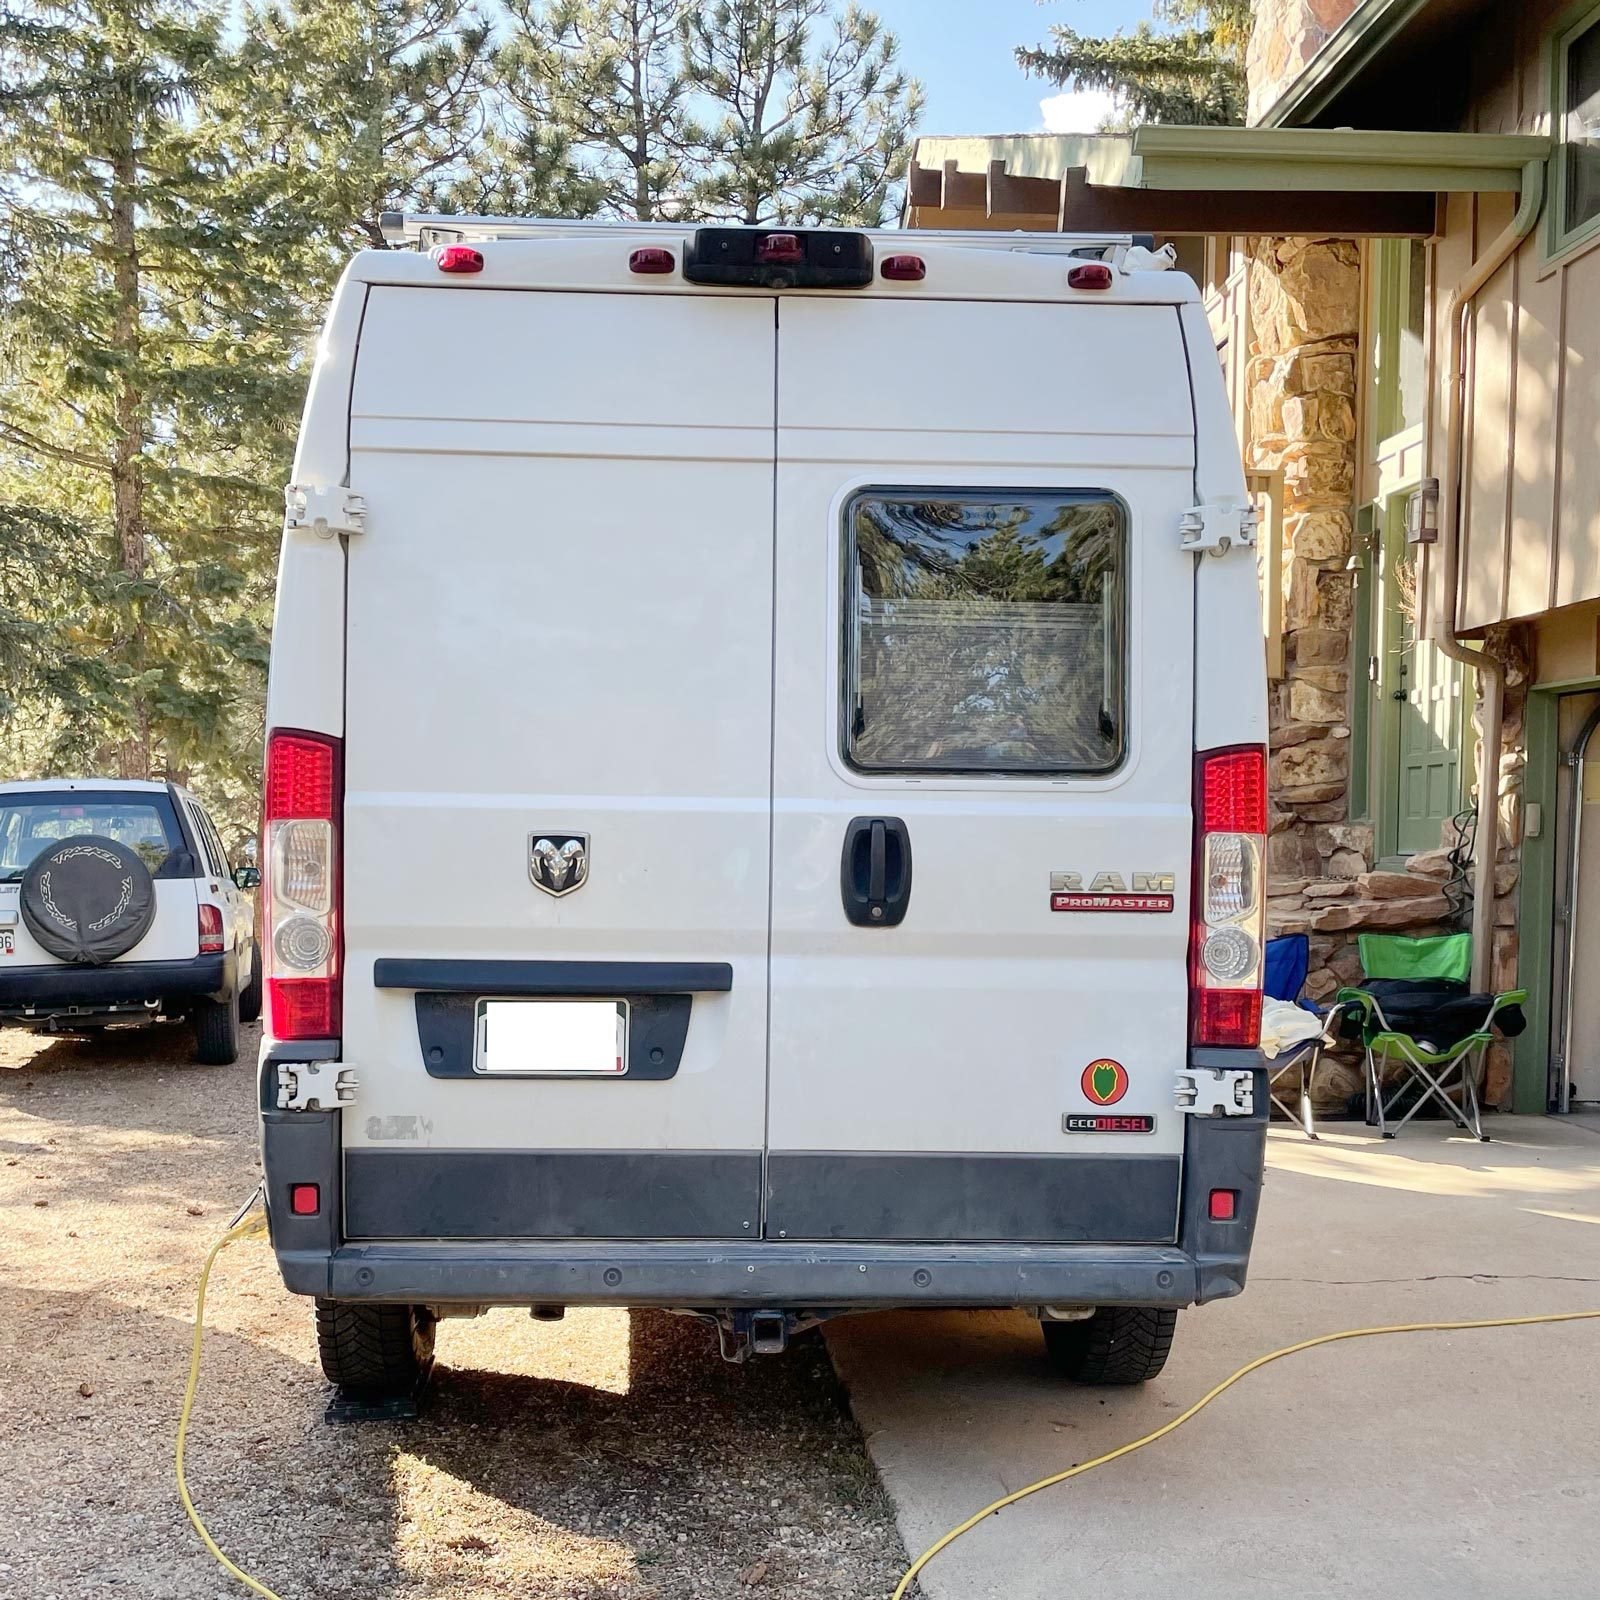 How To Install a Window or Vent in Your Van or Camper